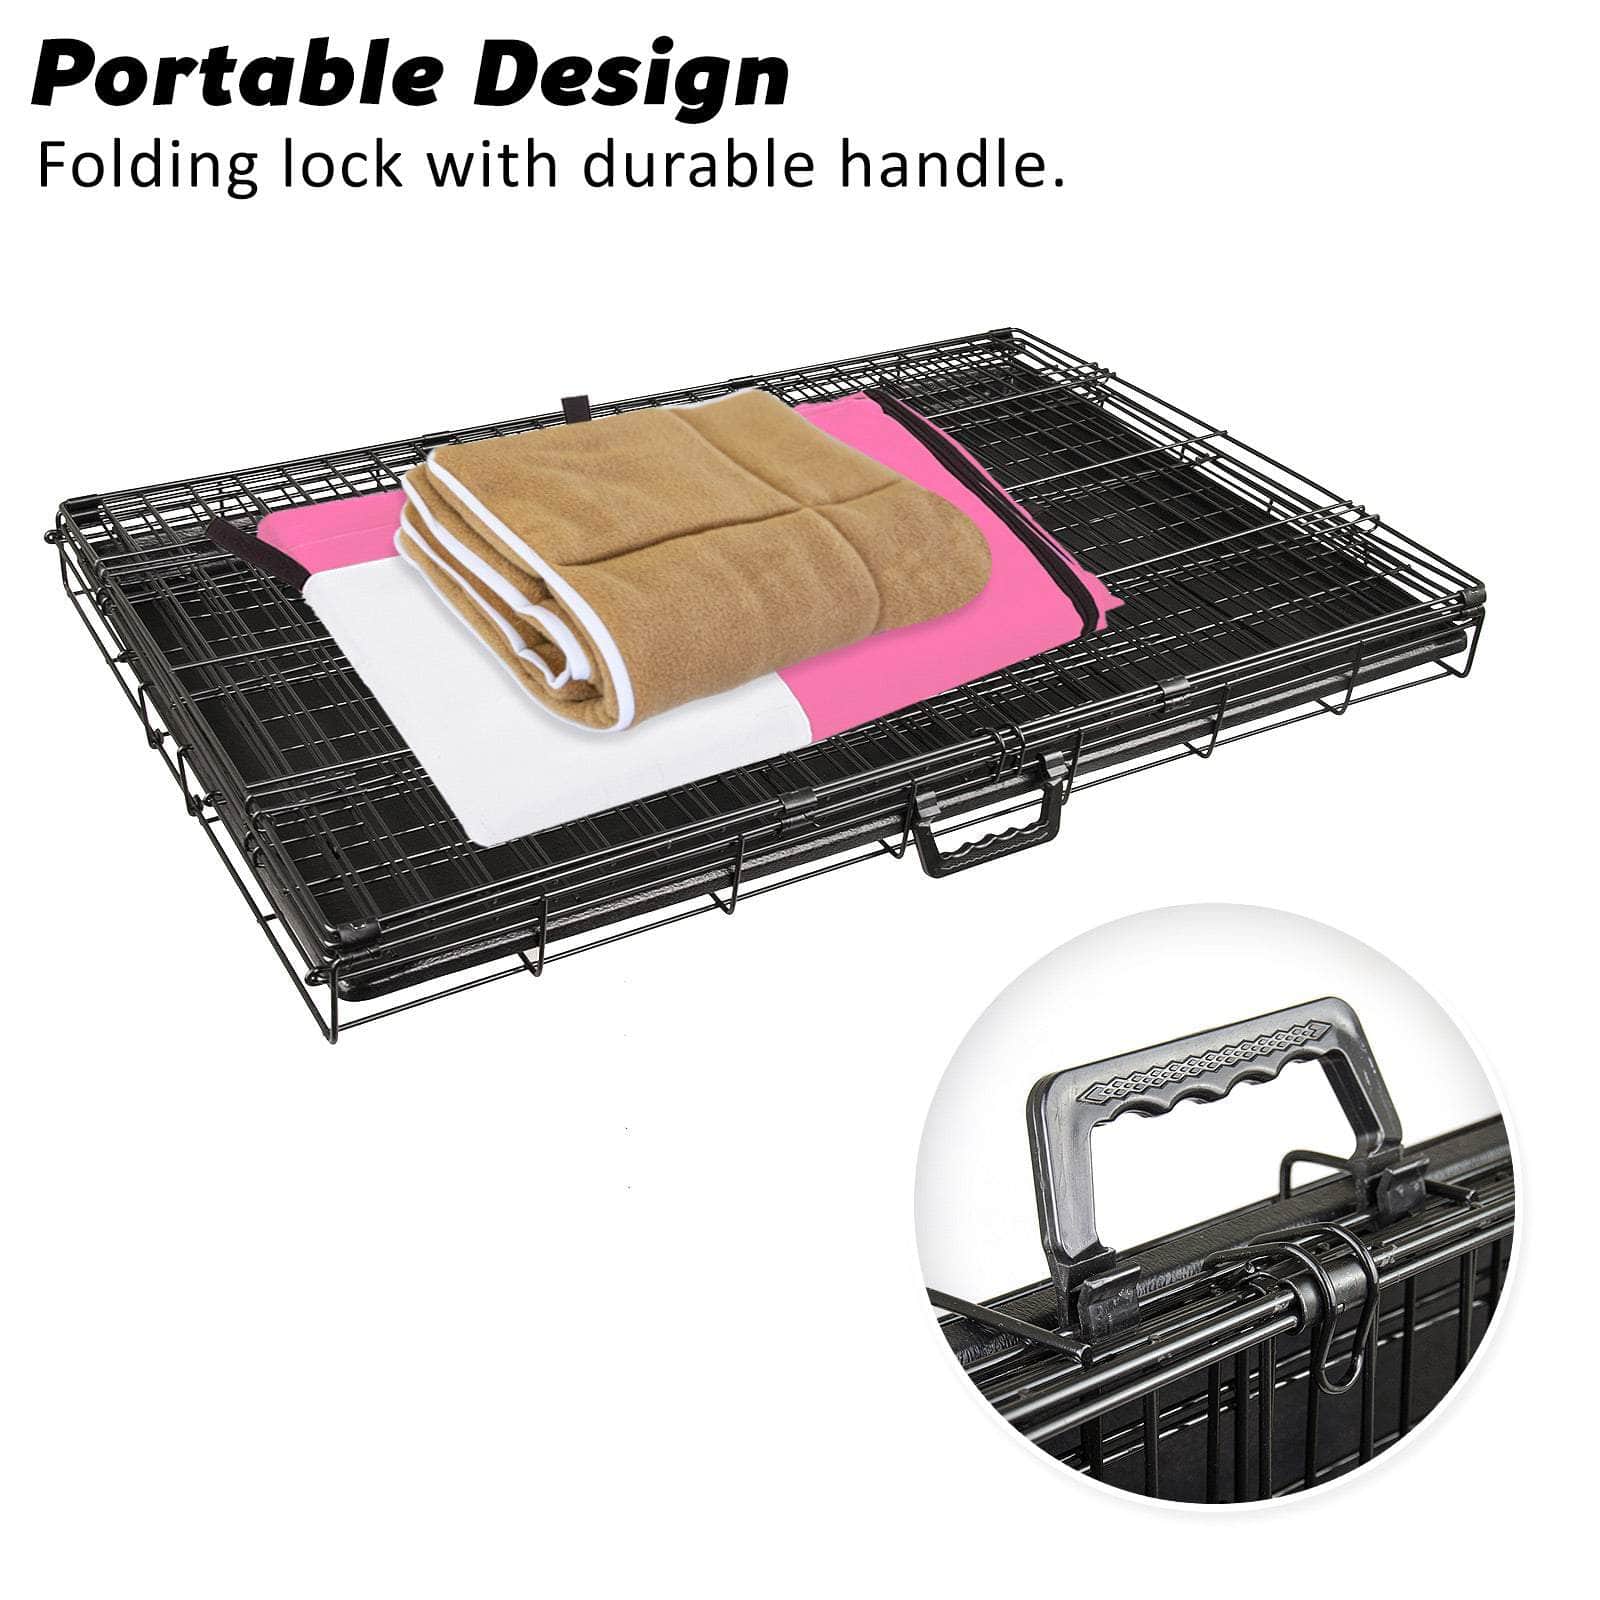 Wire Dog Cage Crate 36In With Tray + Cushion Mat + Pink Cover Combo